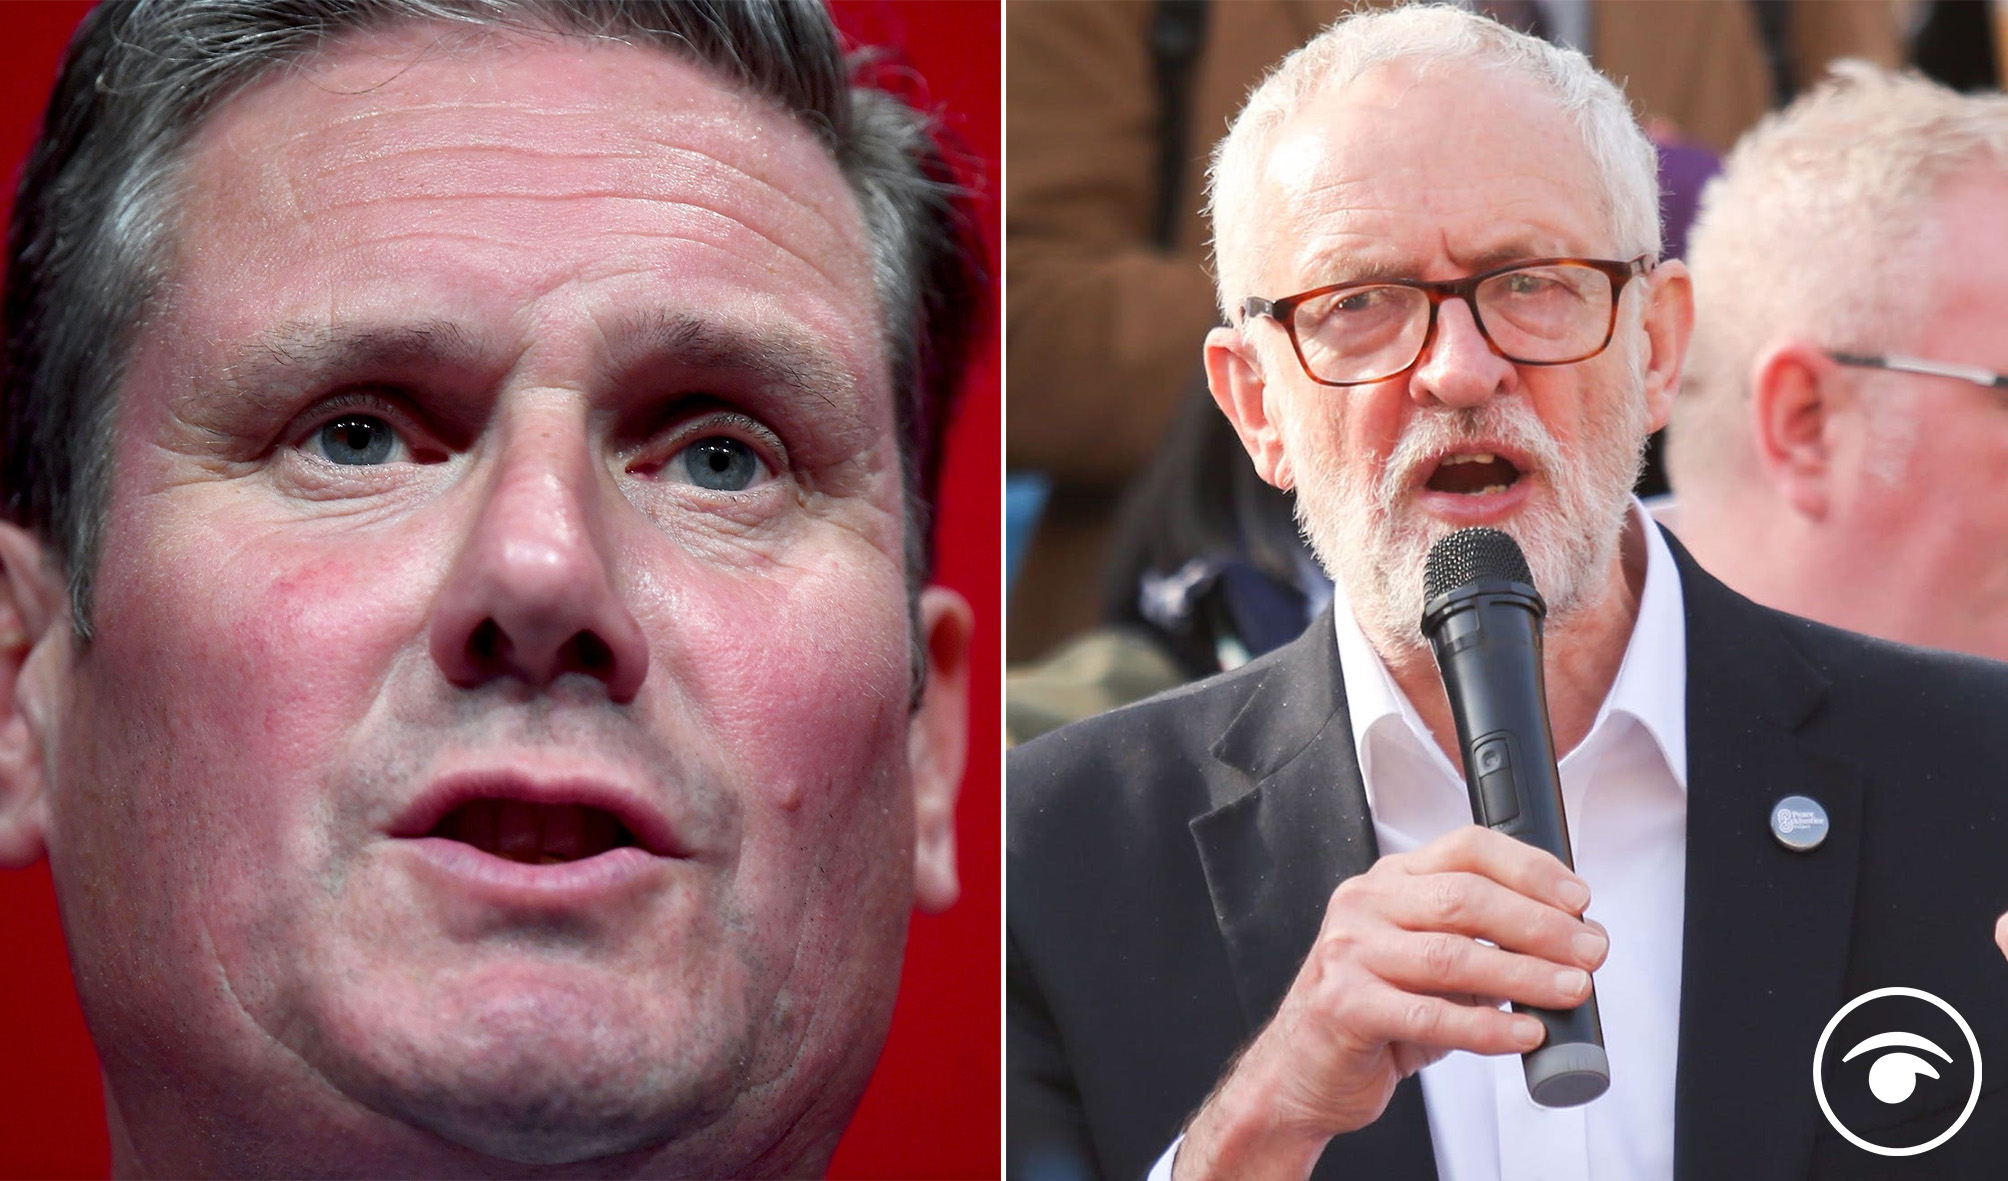 #ApologiseKeirStarmer trends as John Mcdonnell slams his comment about Corbyn